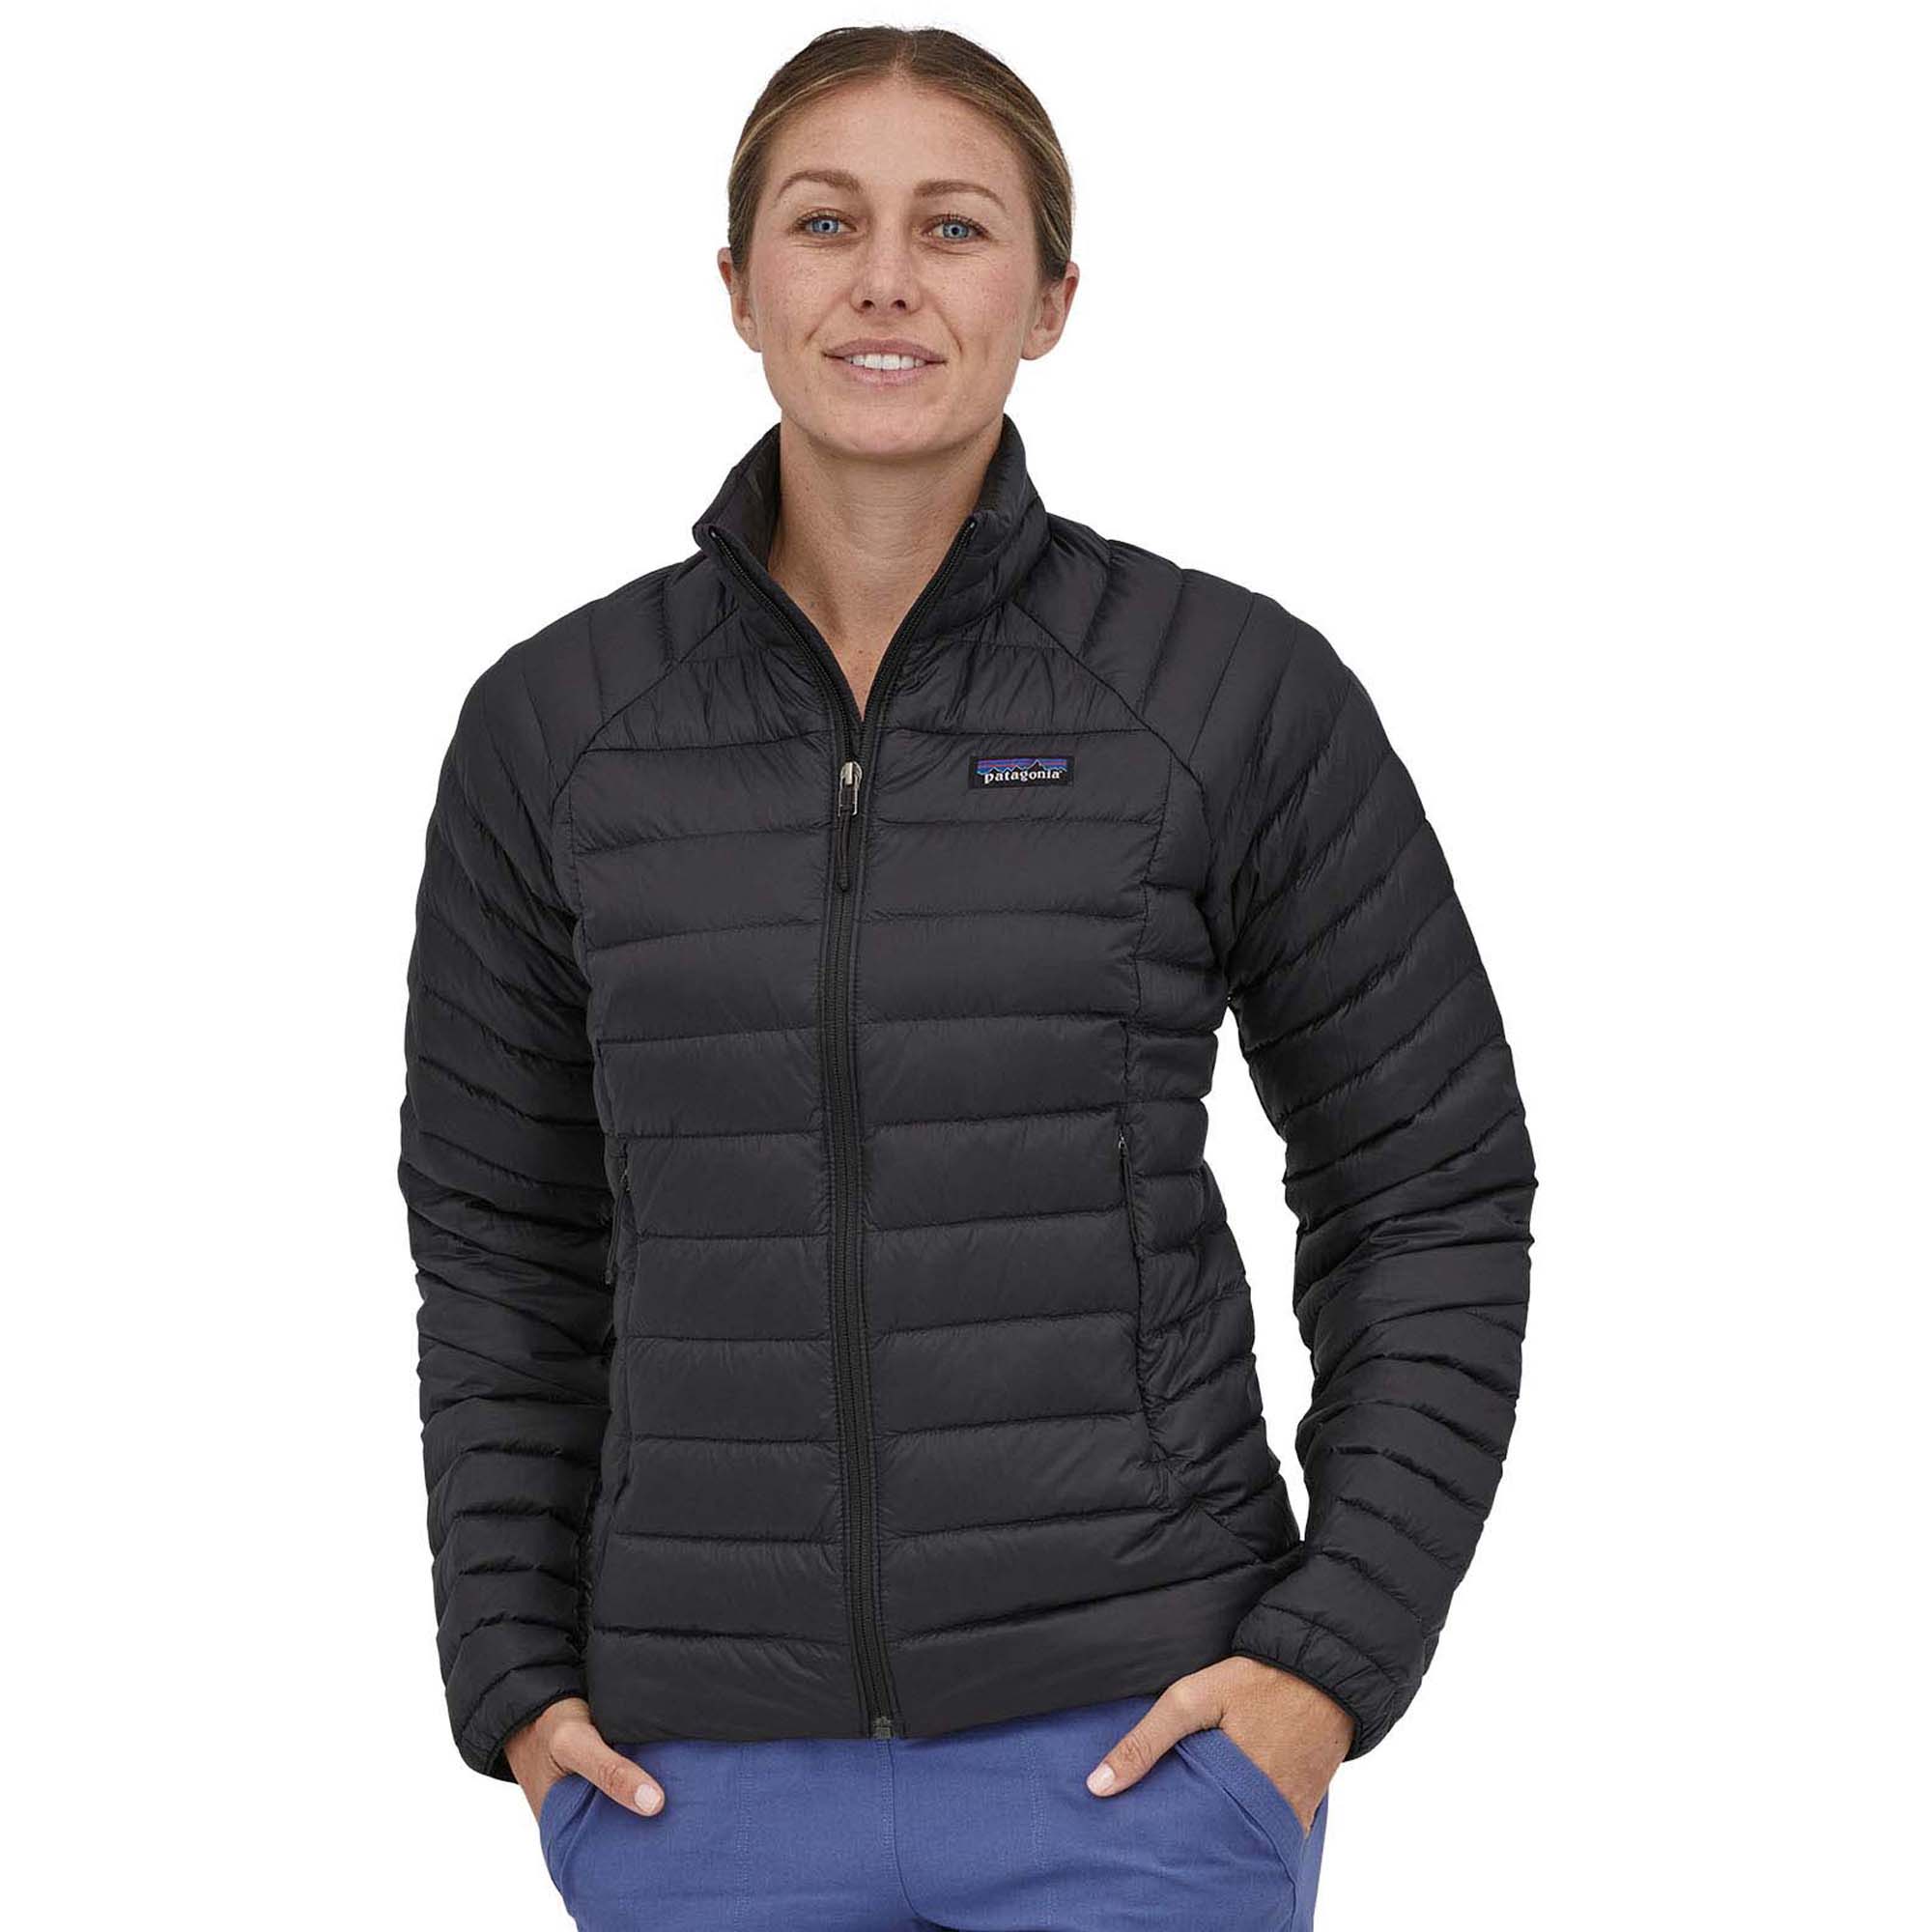 Patagonia Down Sweater Women's Insulated Jacket